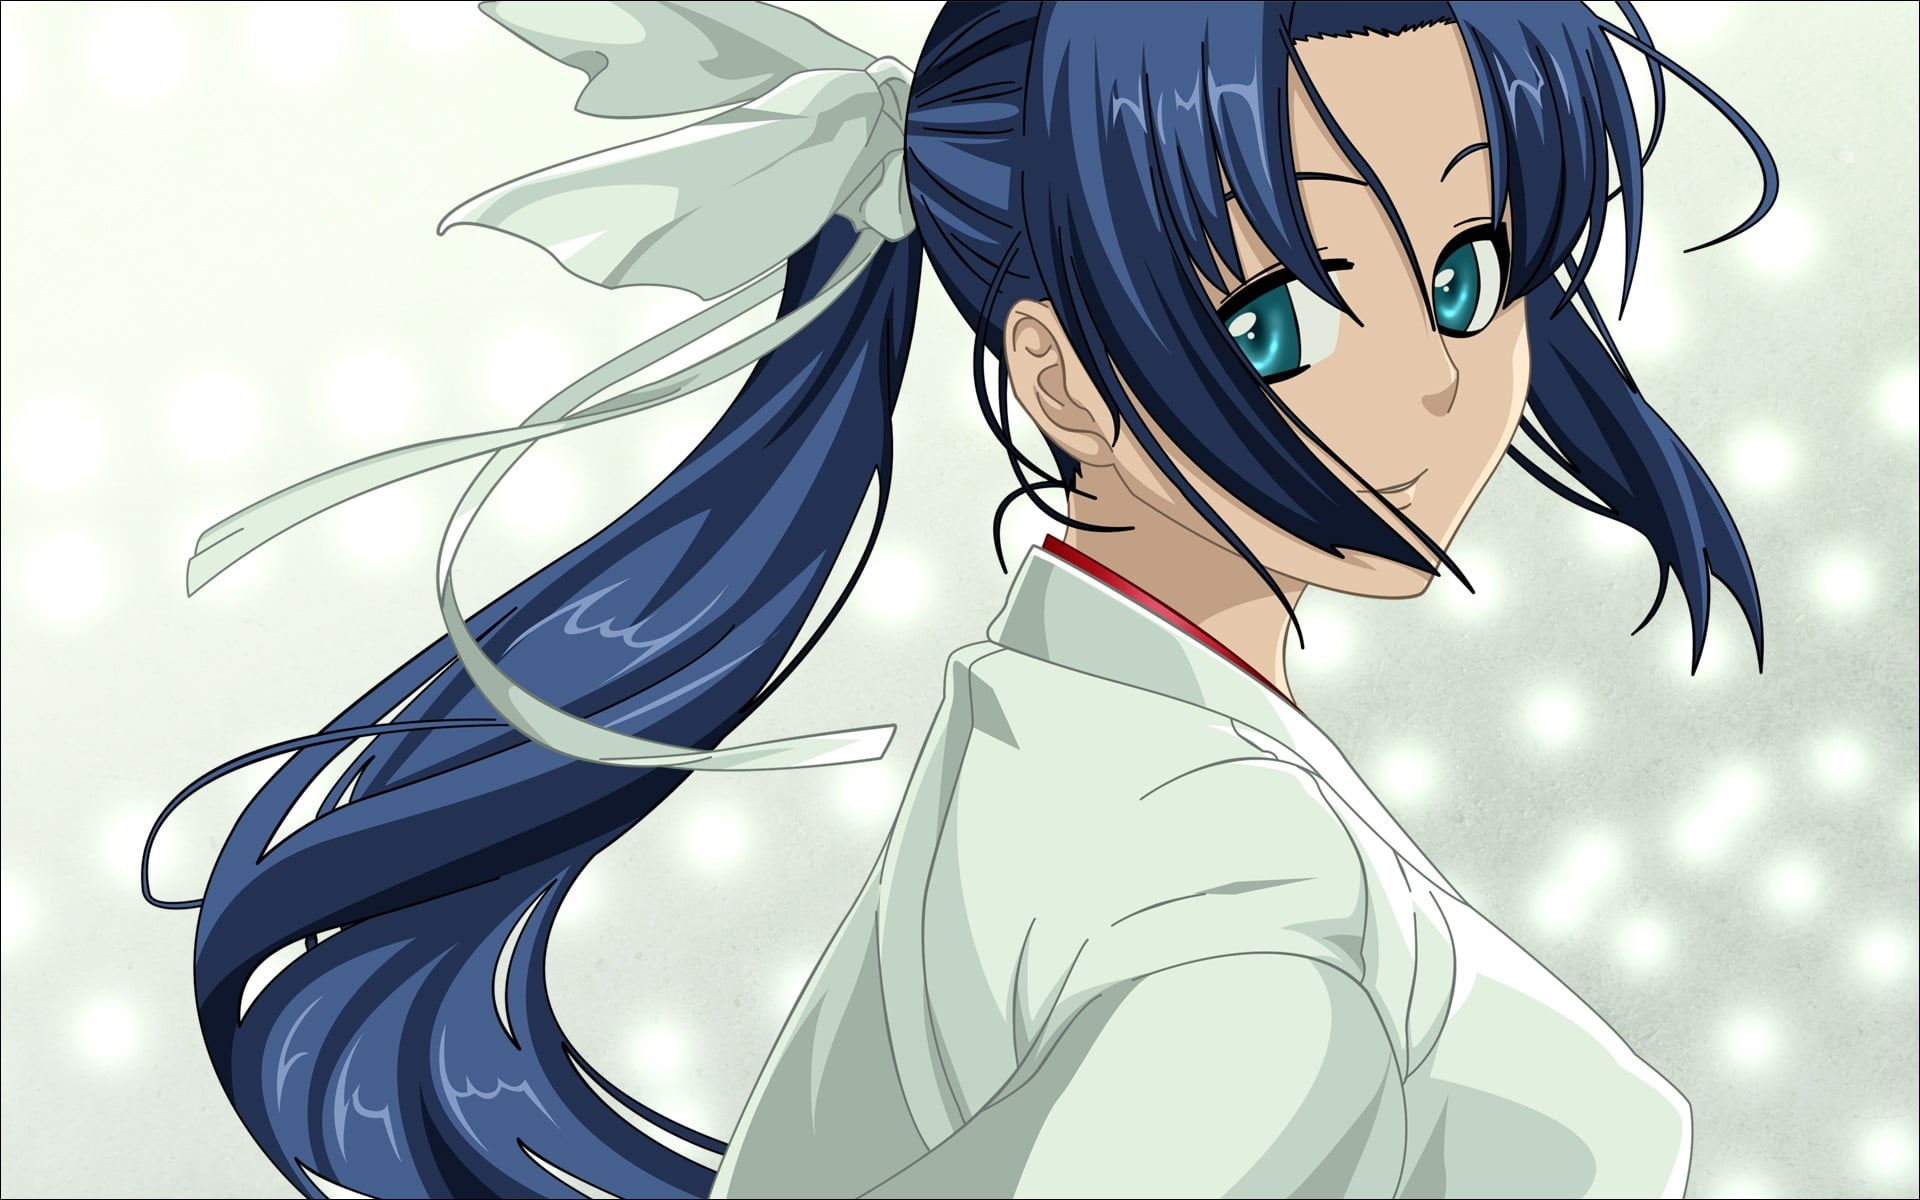 woman with blue hair wearing white shirt anime character